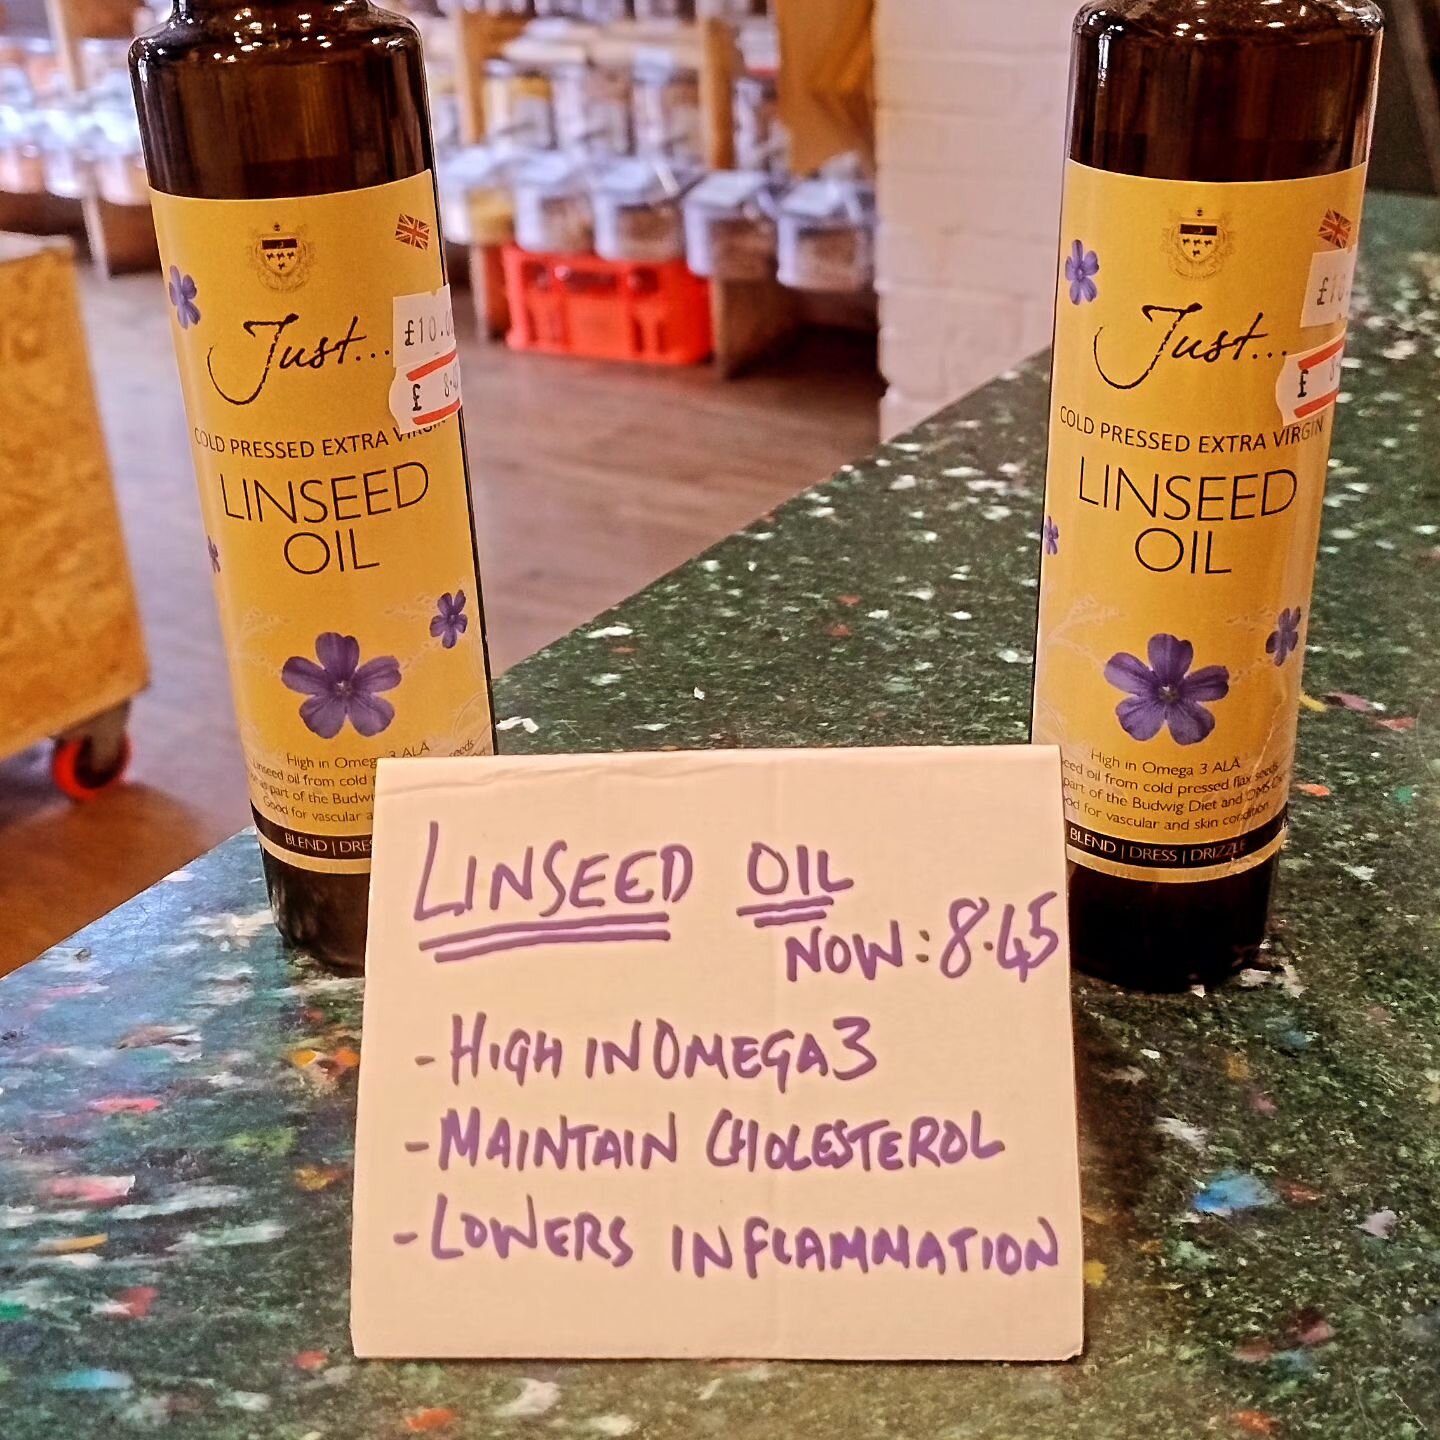 Reduced to clear: cold pressed linseed oil, grown and cold pressed in Staffordshire. 

Linseed oil should be used as a dietary supplement. It can be used in dressings, yoghurt and smoothies (but is shouldn't be used for roasting or frying). 

It has 